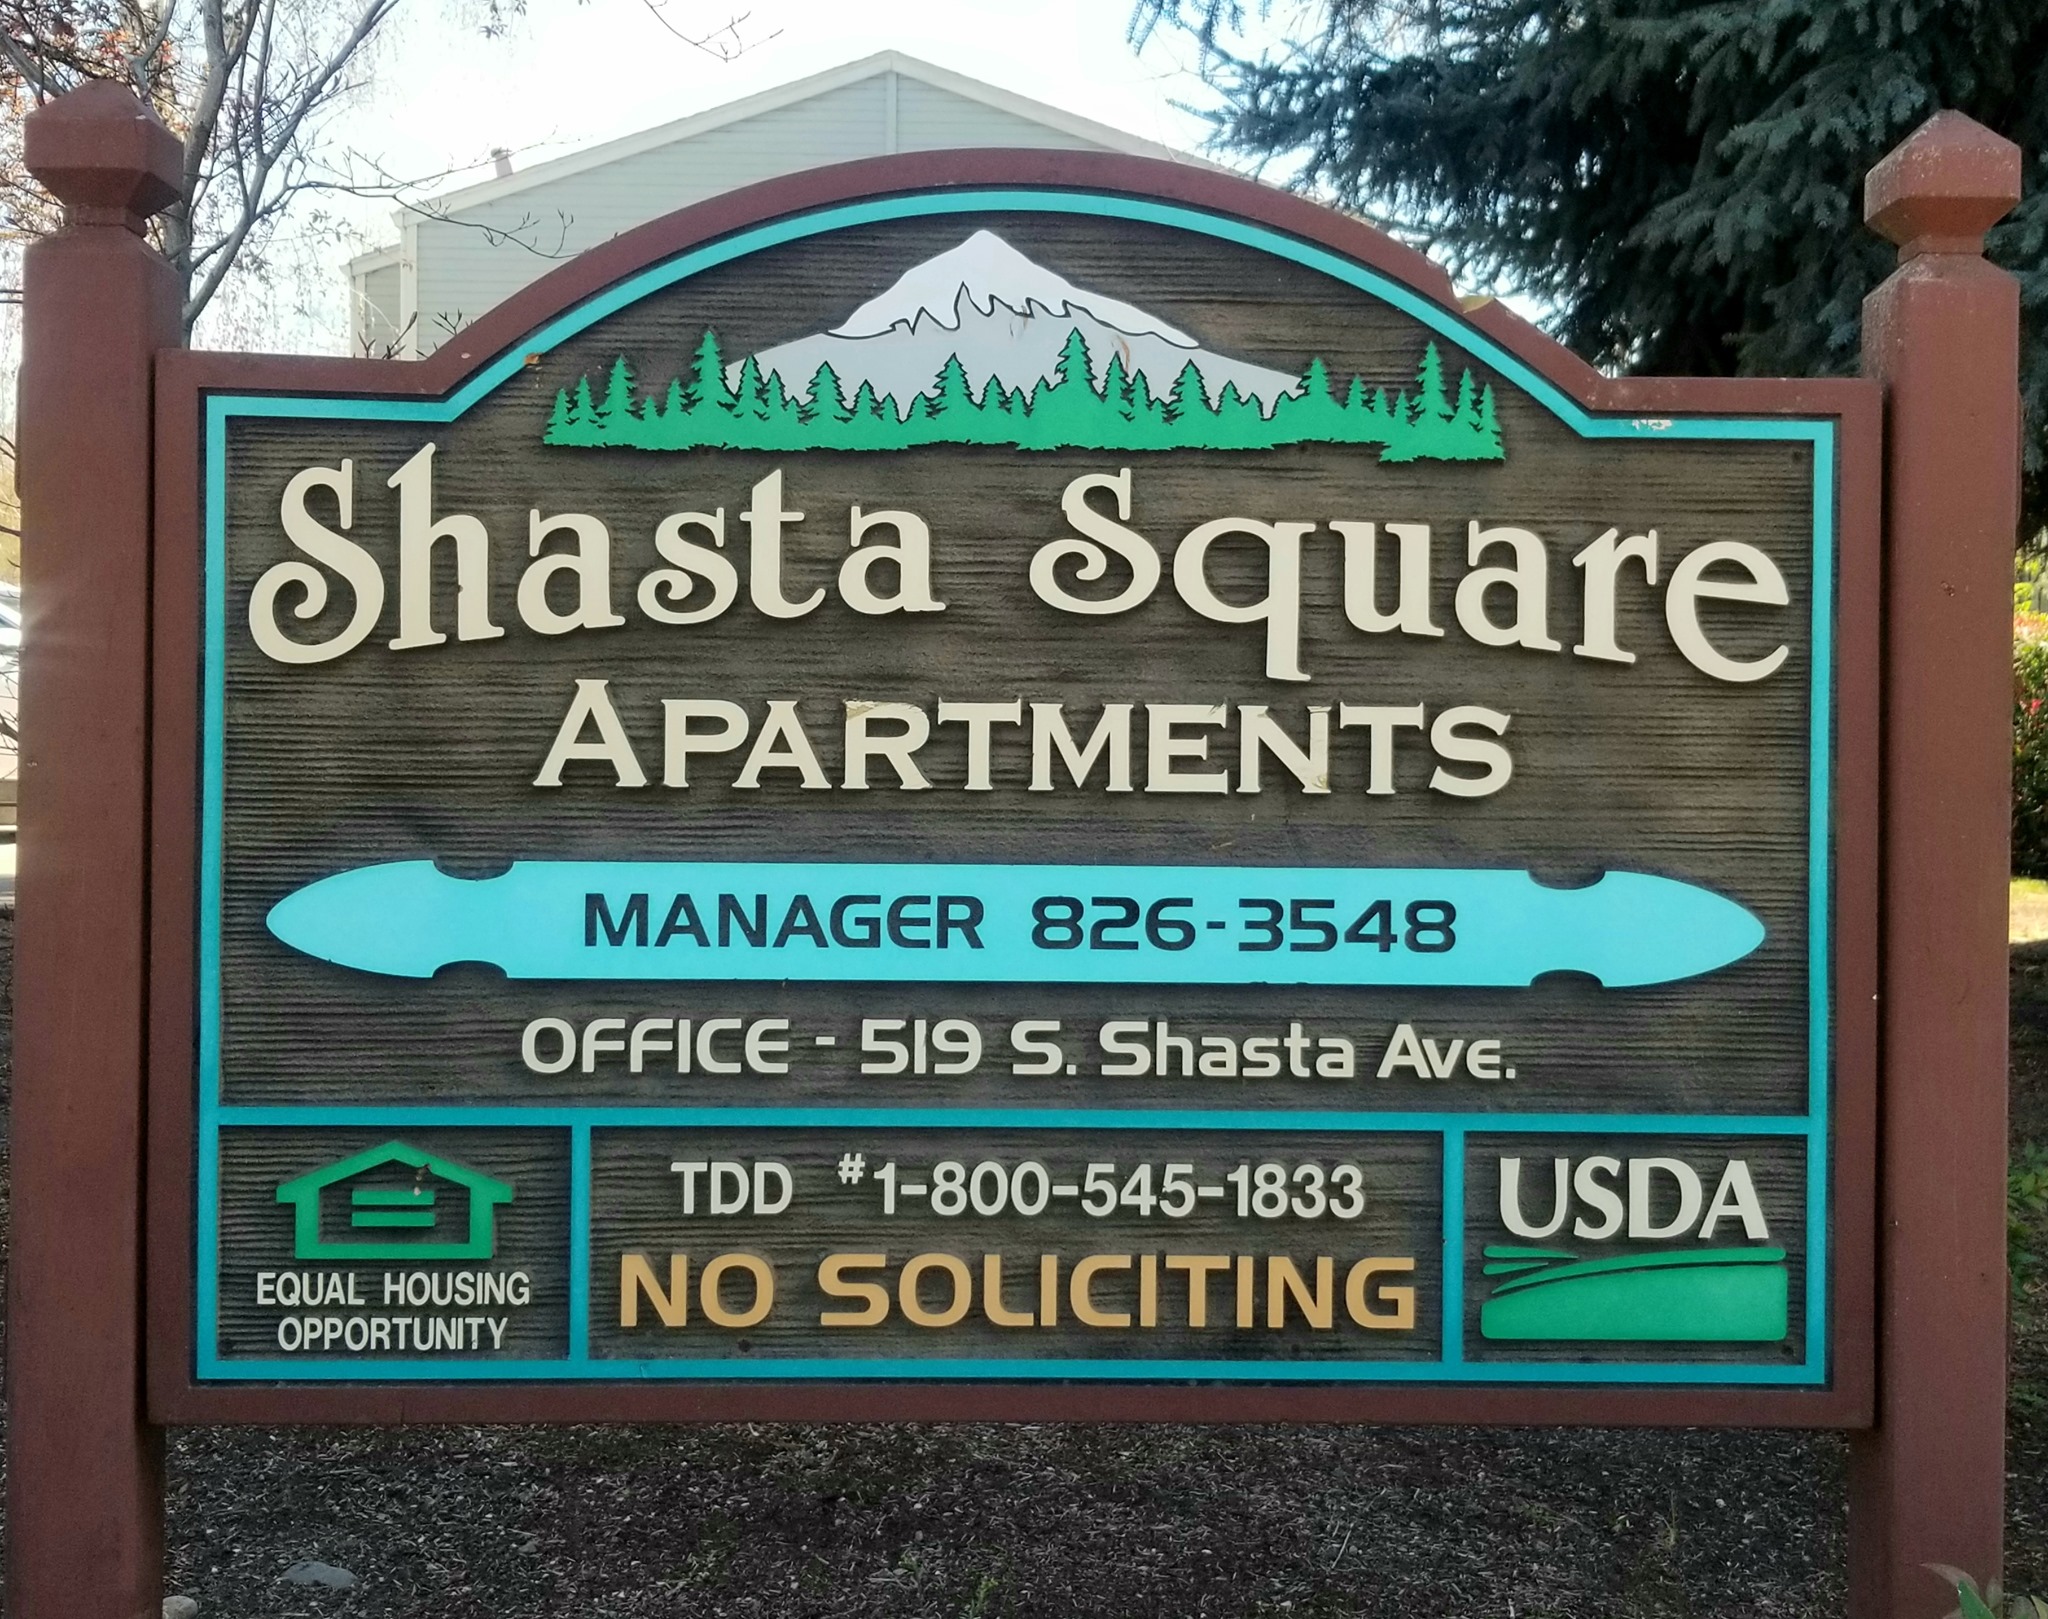 Shasta Square Affordable Apartments